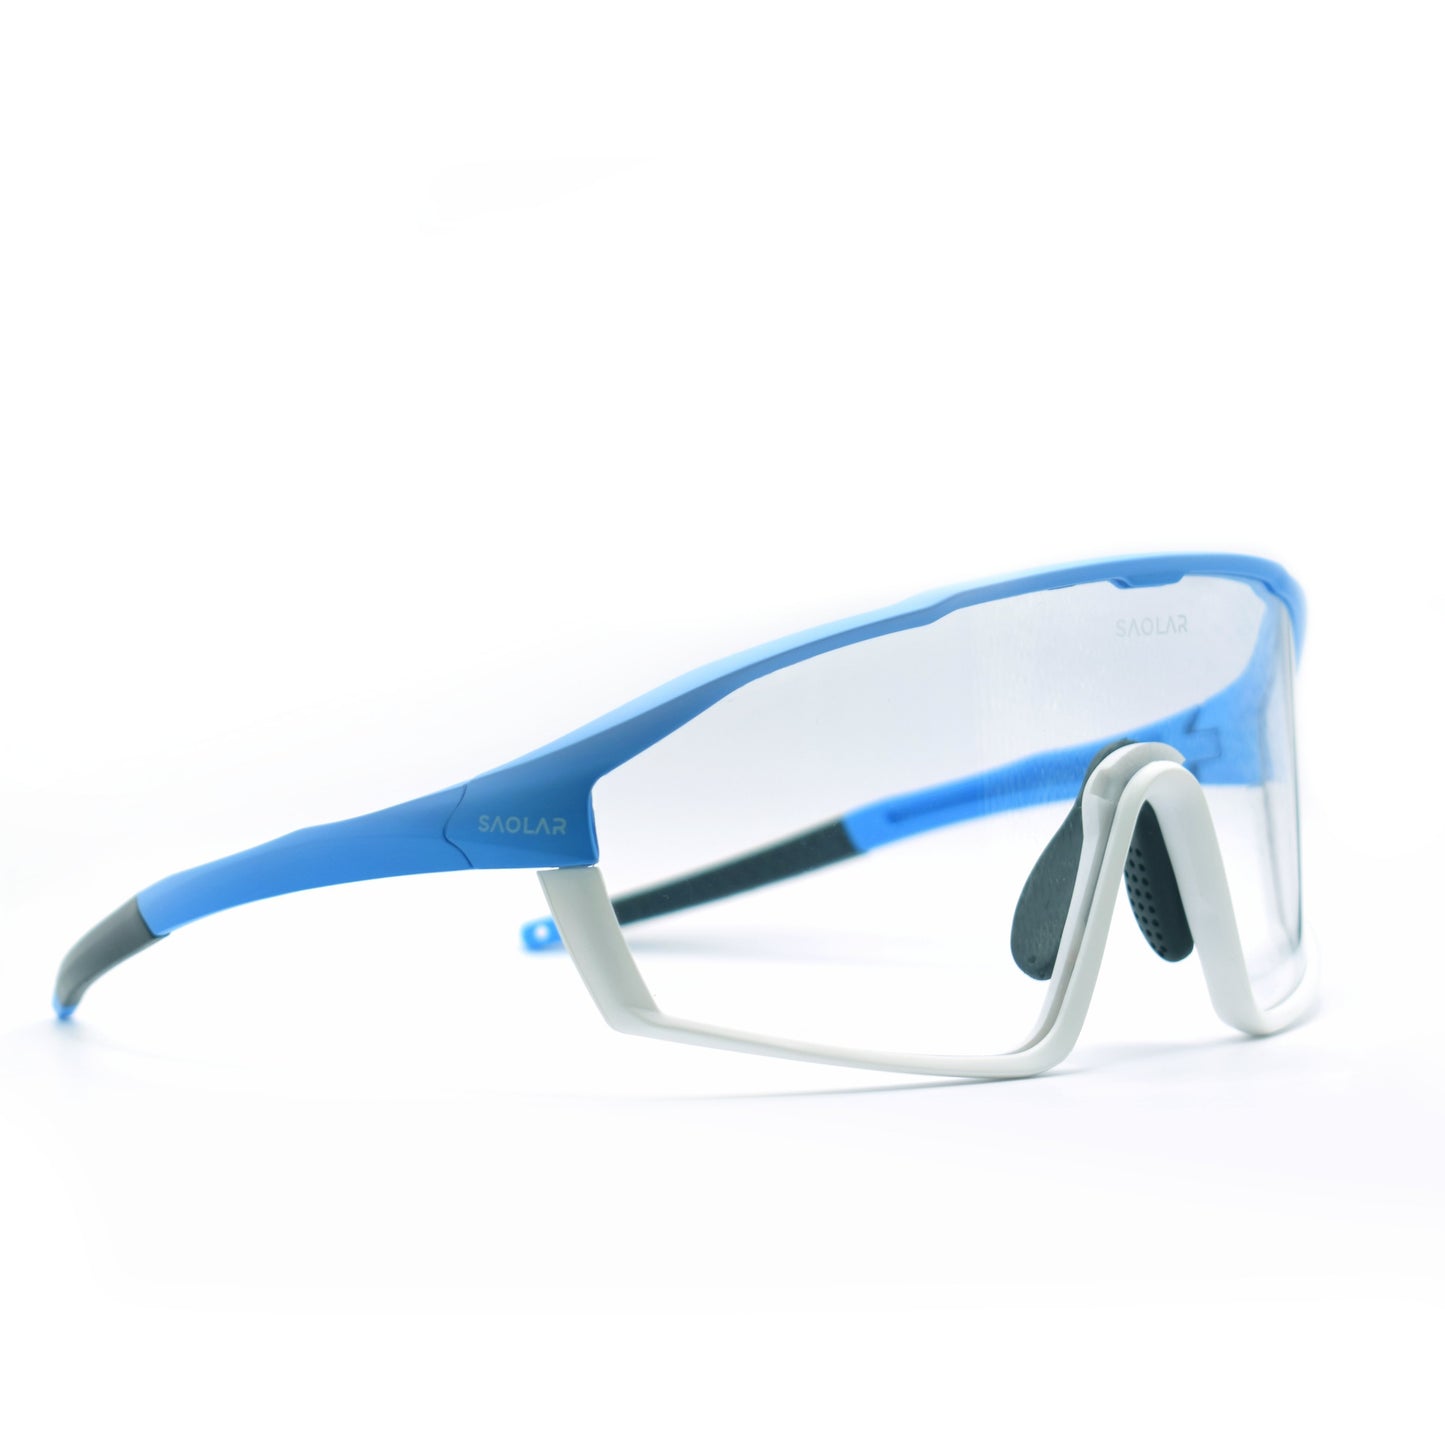 Leviathan Cycling Sunglasses - Side view transparent